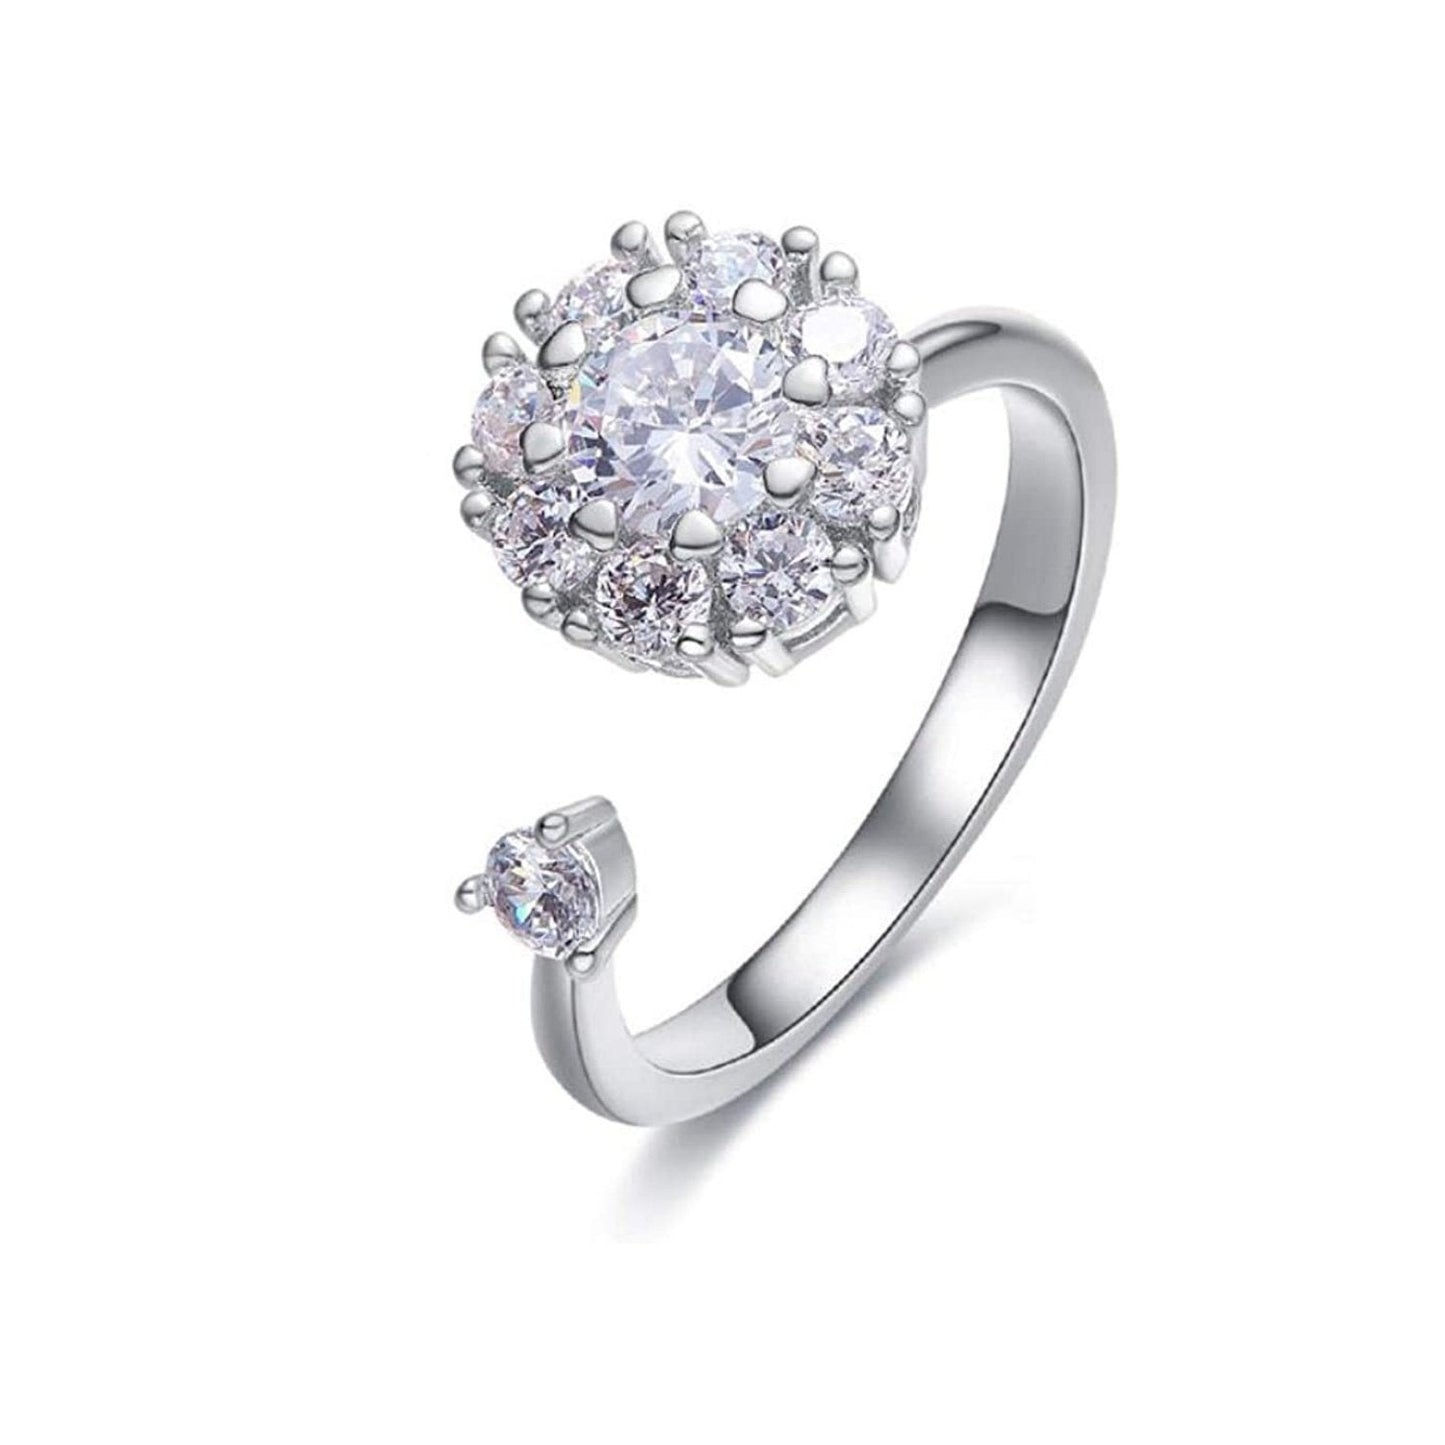 Solitaire Ring Sun Flower Adjustable embellished with Swarovski Zirconia in 92.5 Silver